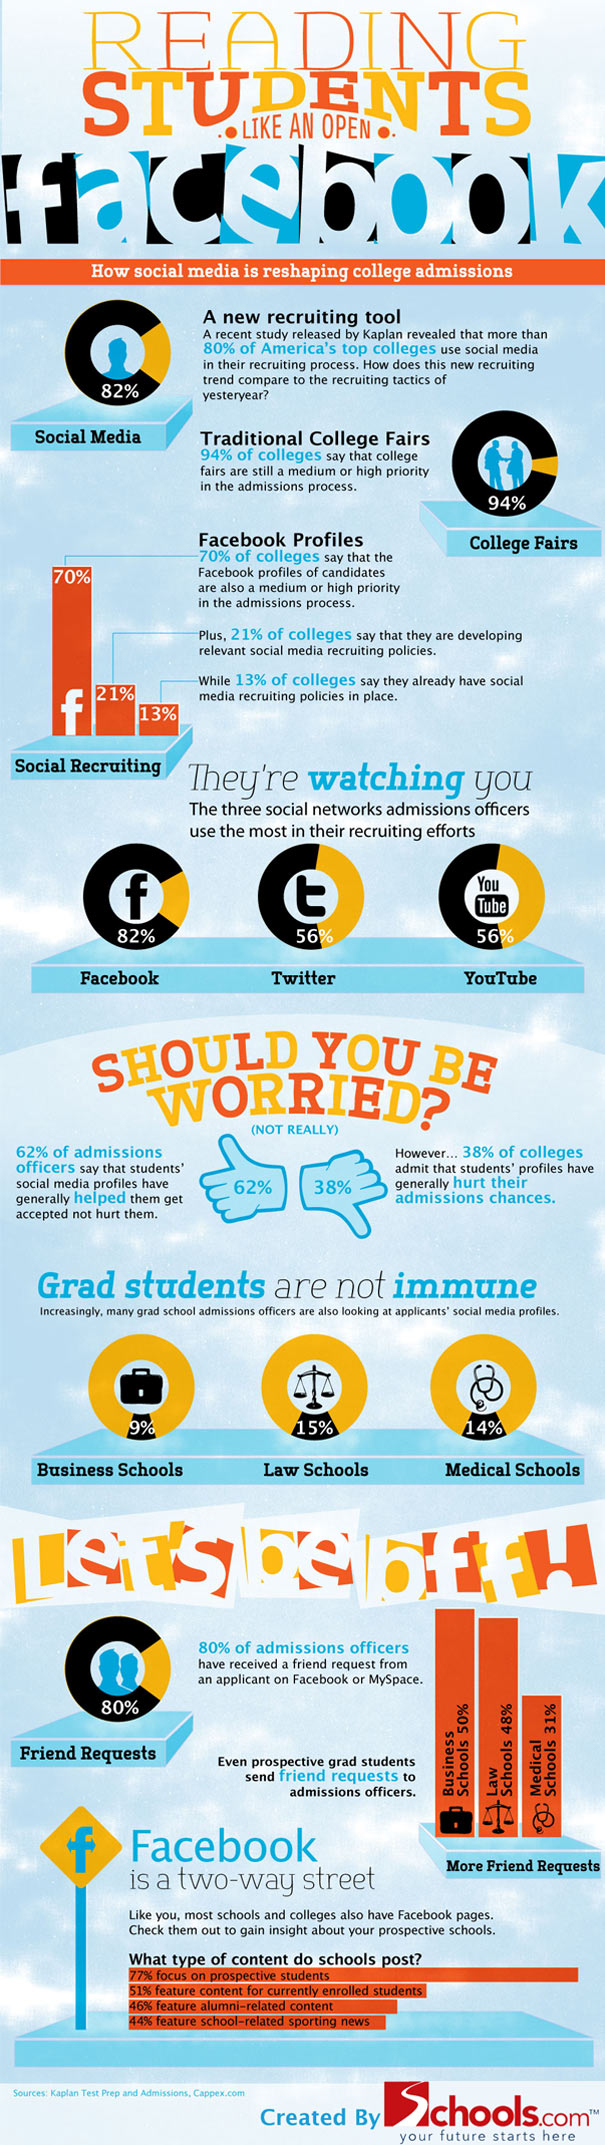 Facebook Has A Huge Impact On College Admissions [Infographic]